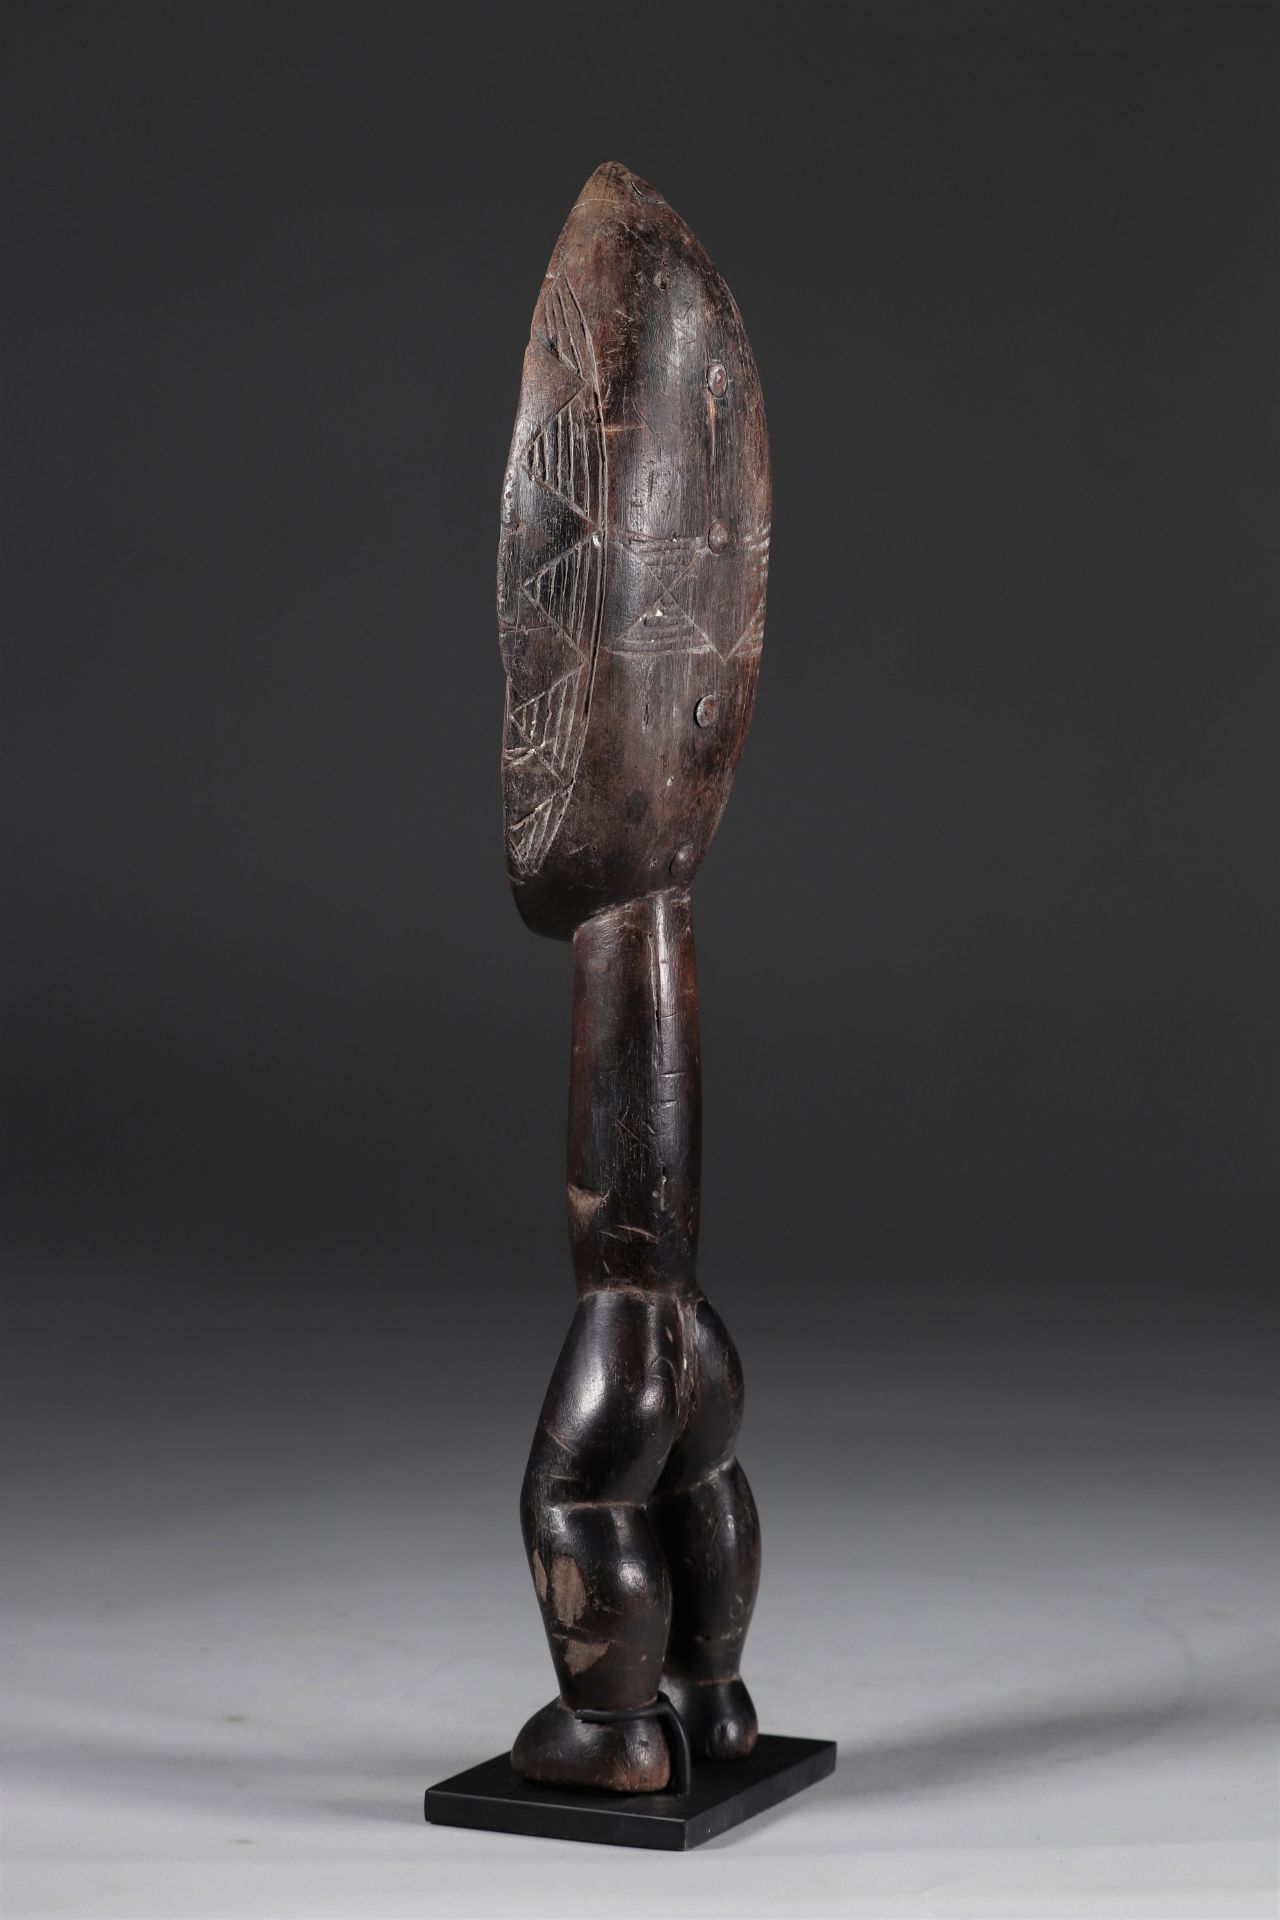 Ceremonial spoon Dan early 20th century beautiful patina - private collection Belgium - Image 5 of 6